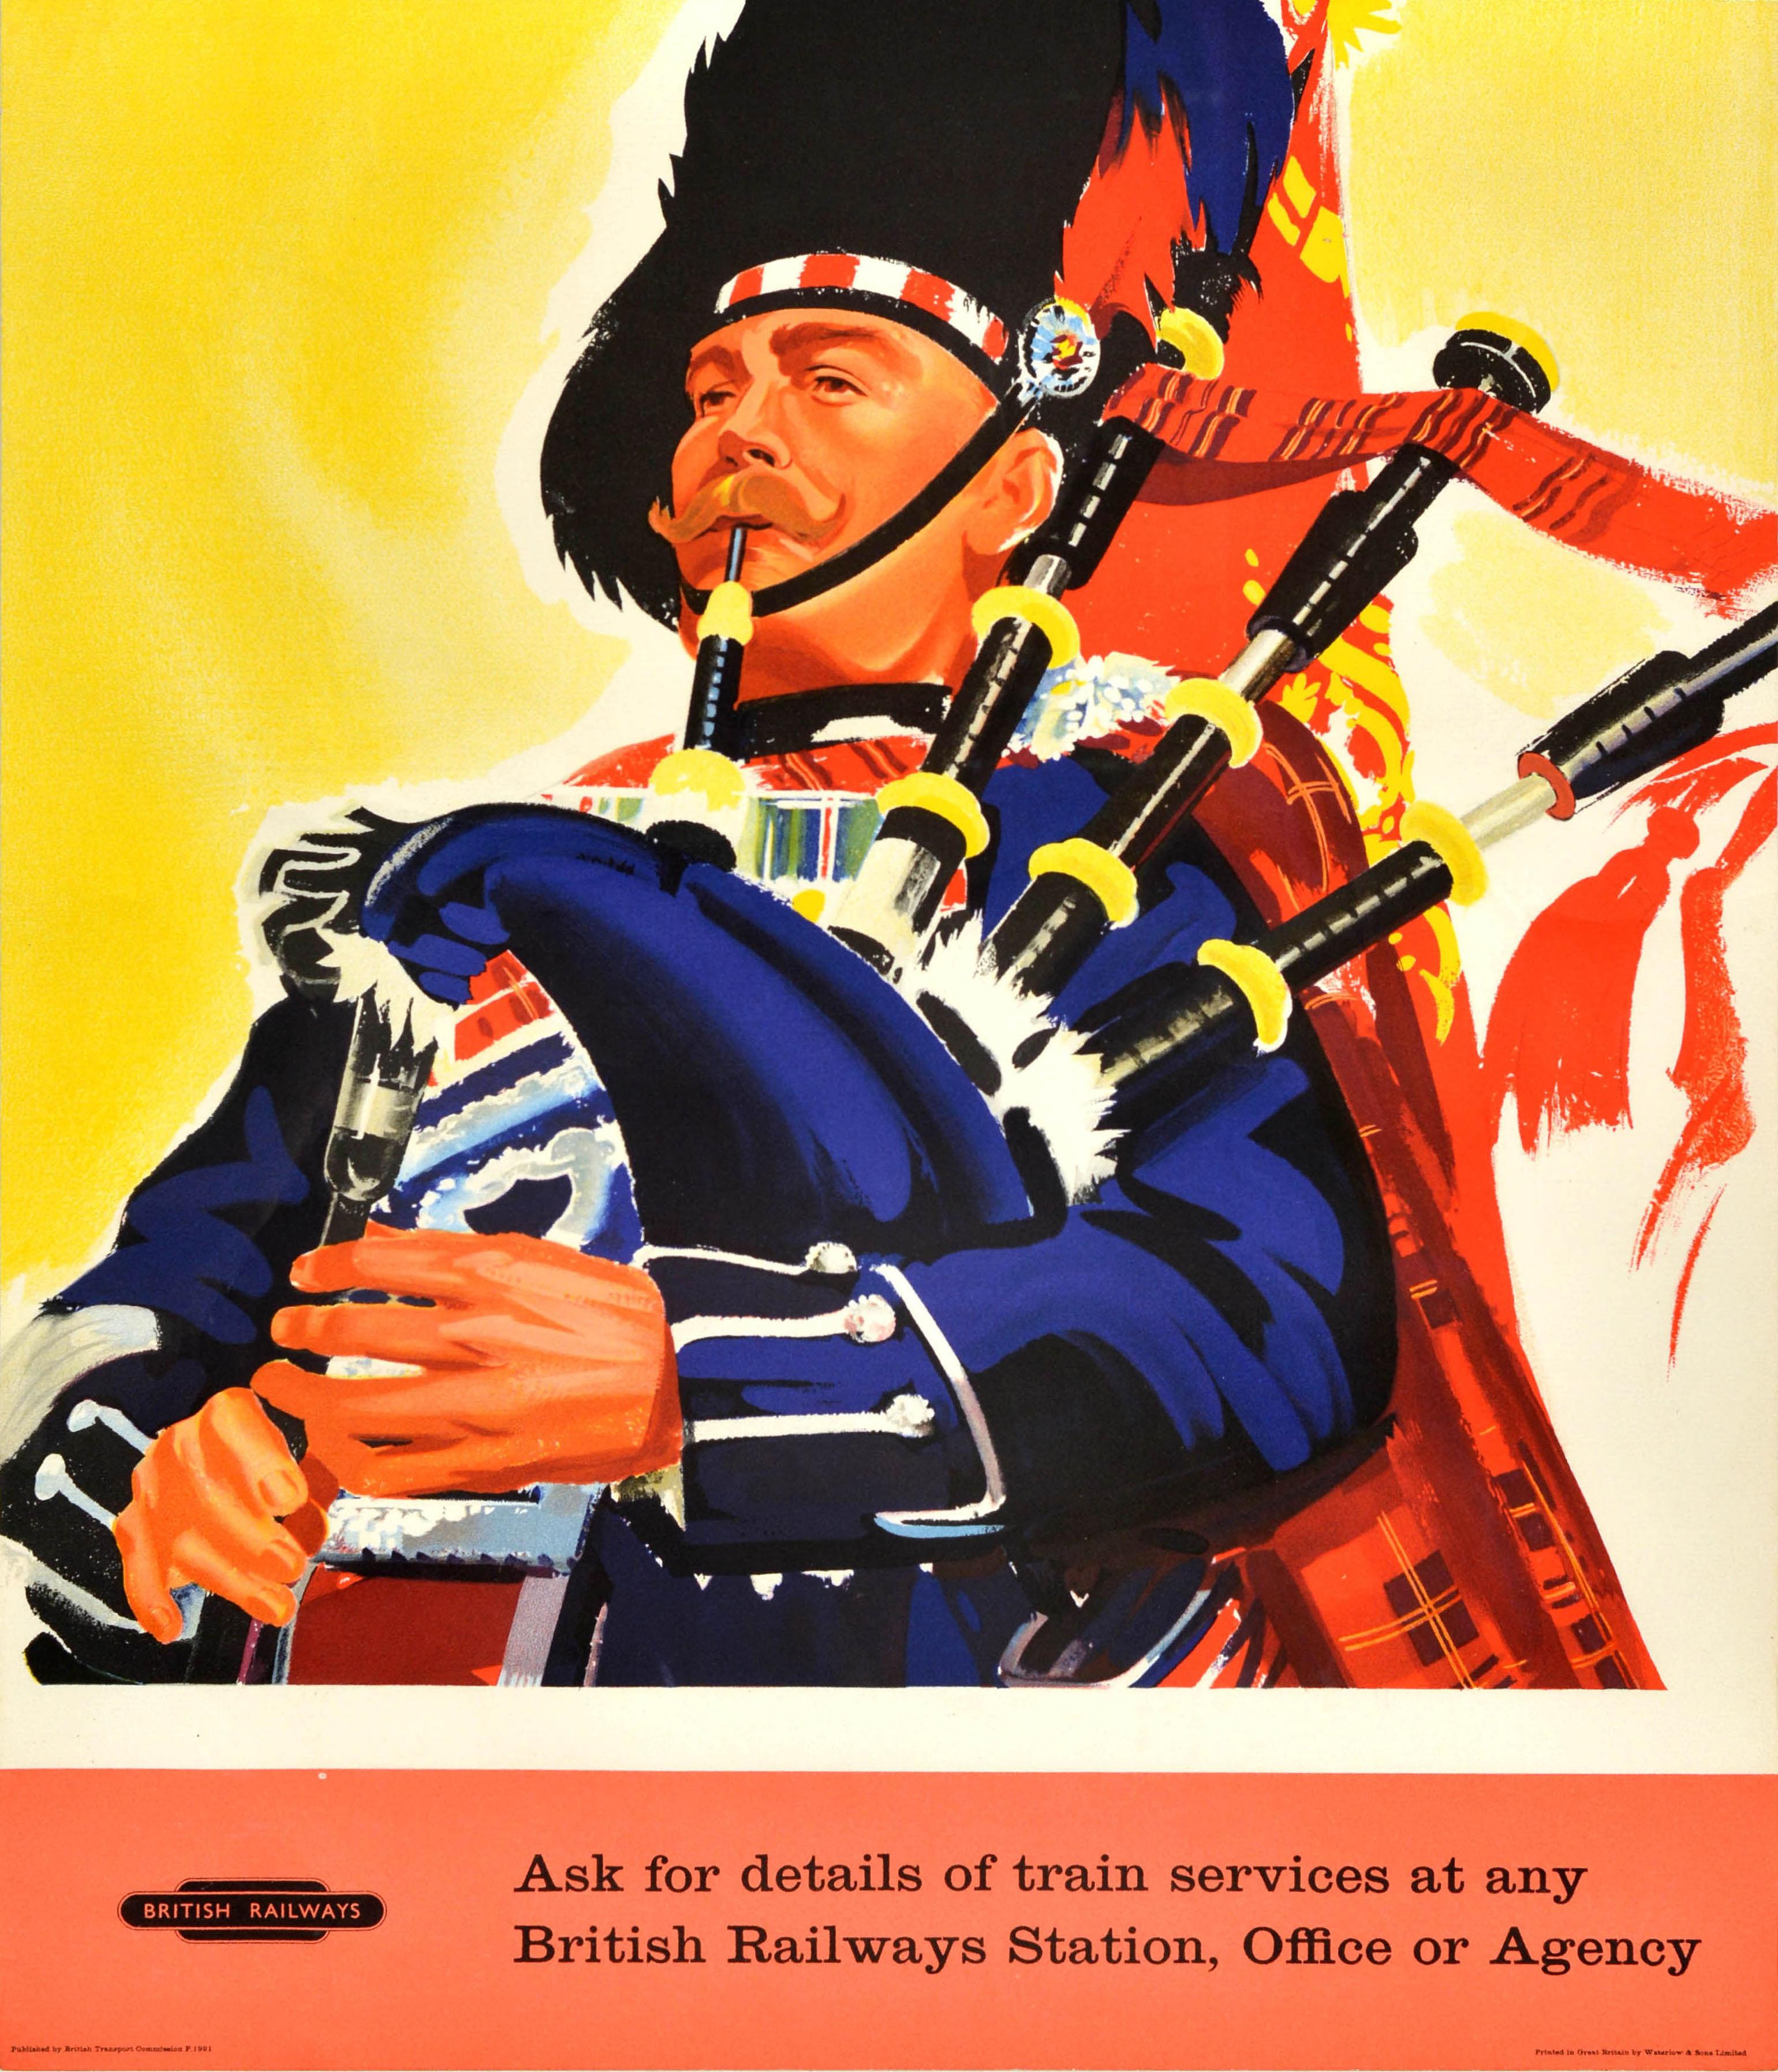 Original vintage railway travel advertising poster - See Britain by Train - featuring a colourful illustration of a Scottish piper in uniform playing music on bagpipes set on a yellow background, the title in red and white on a black border above